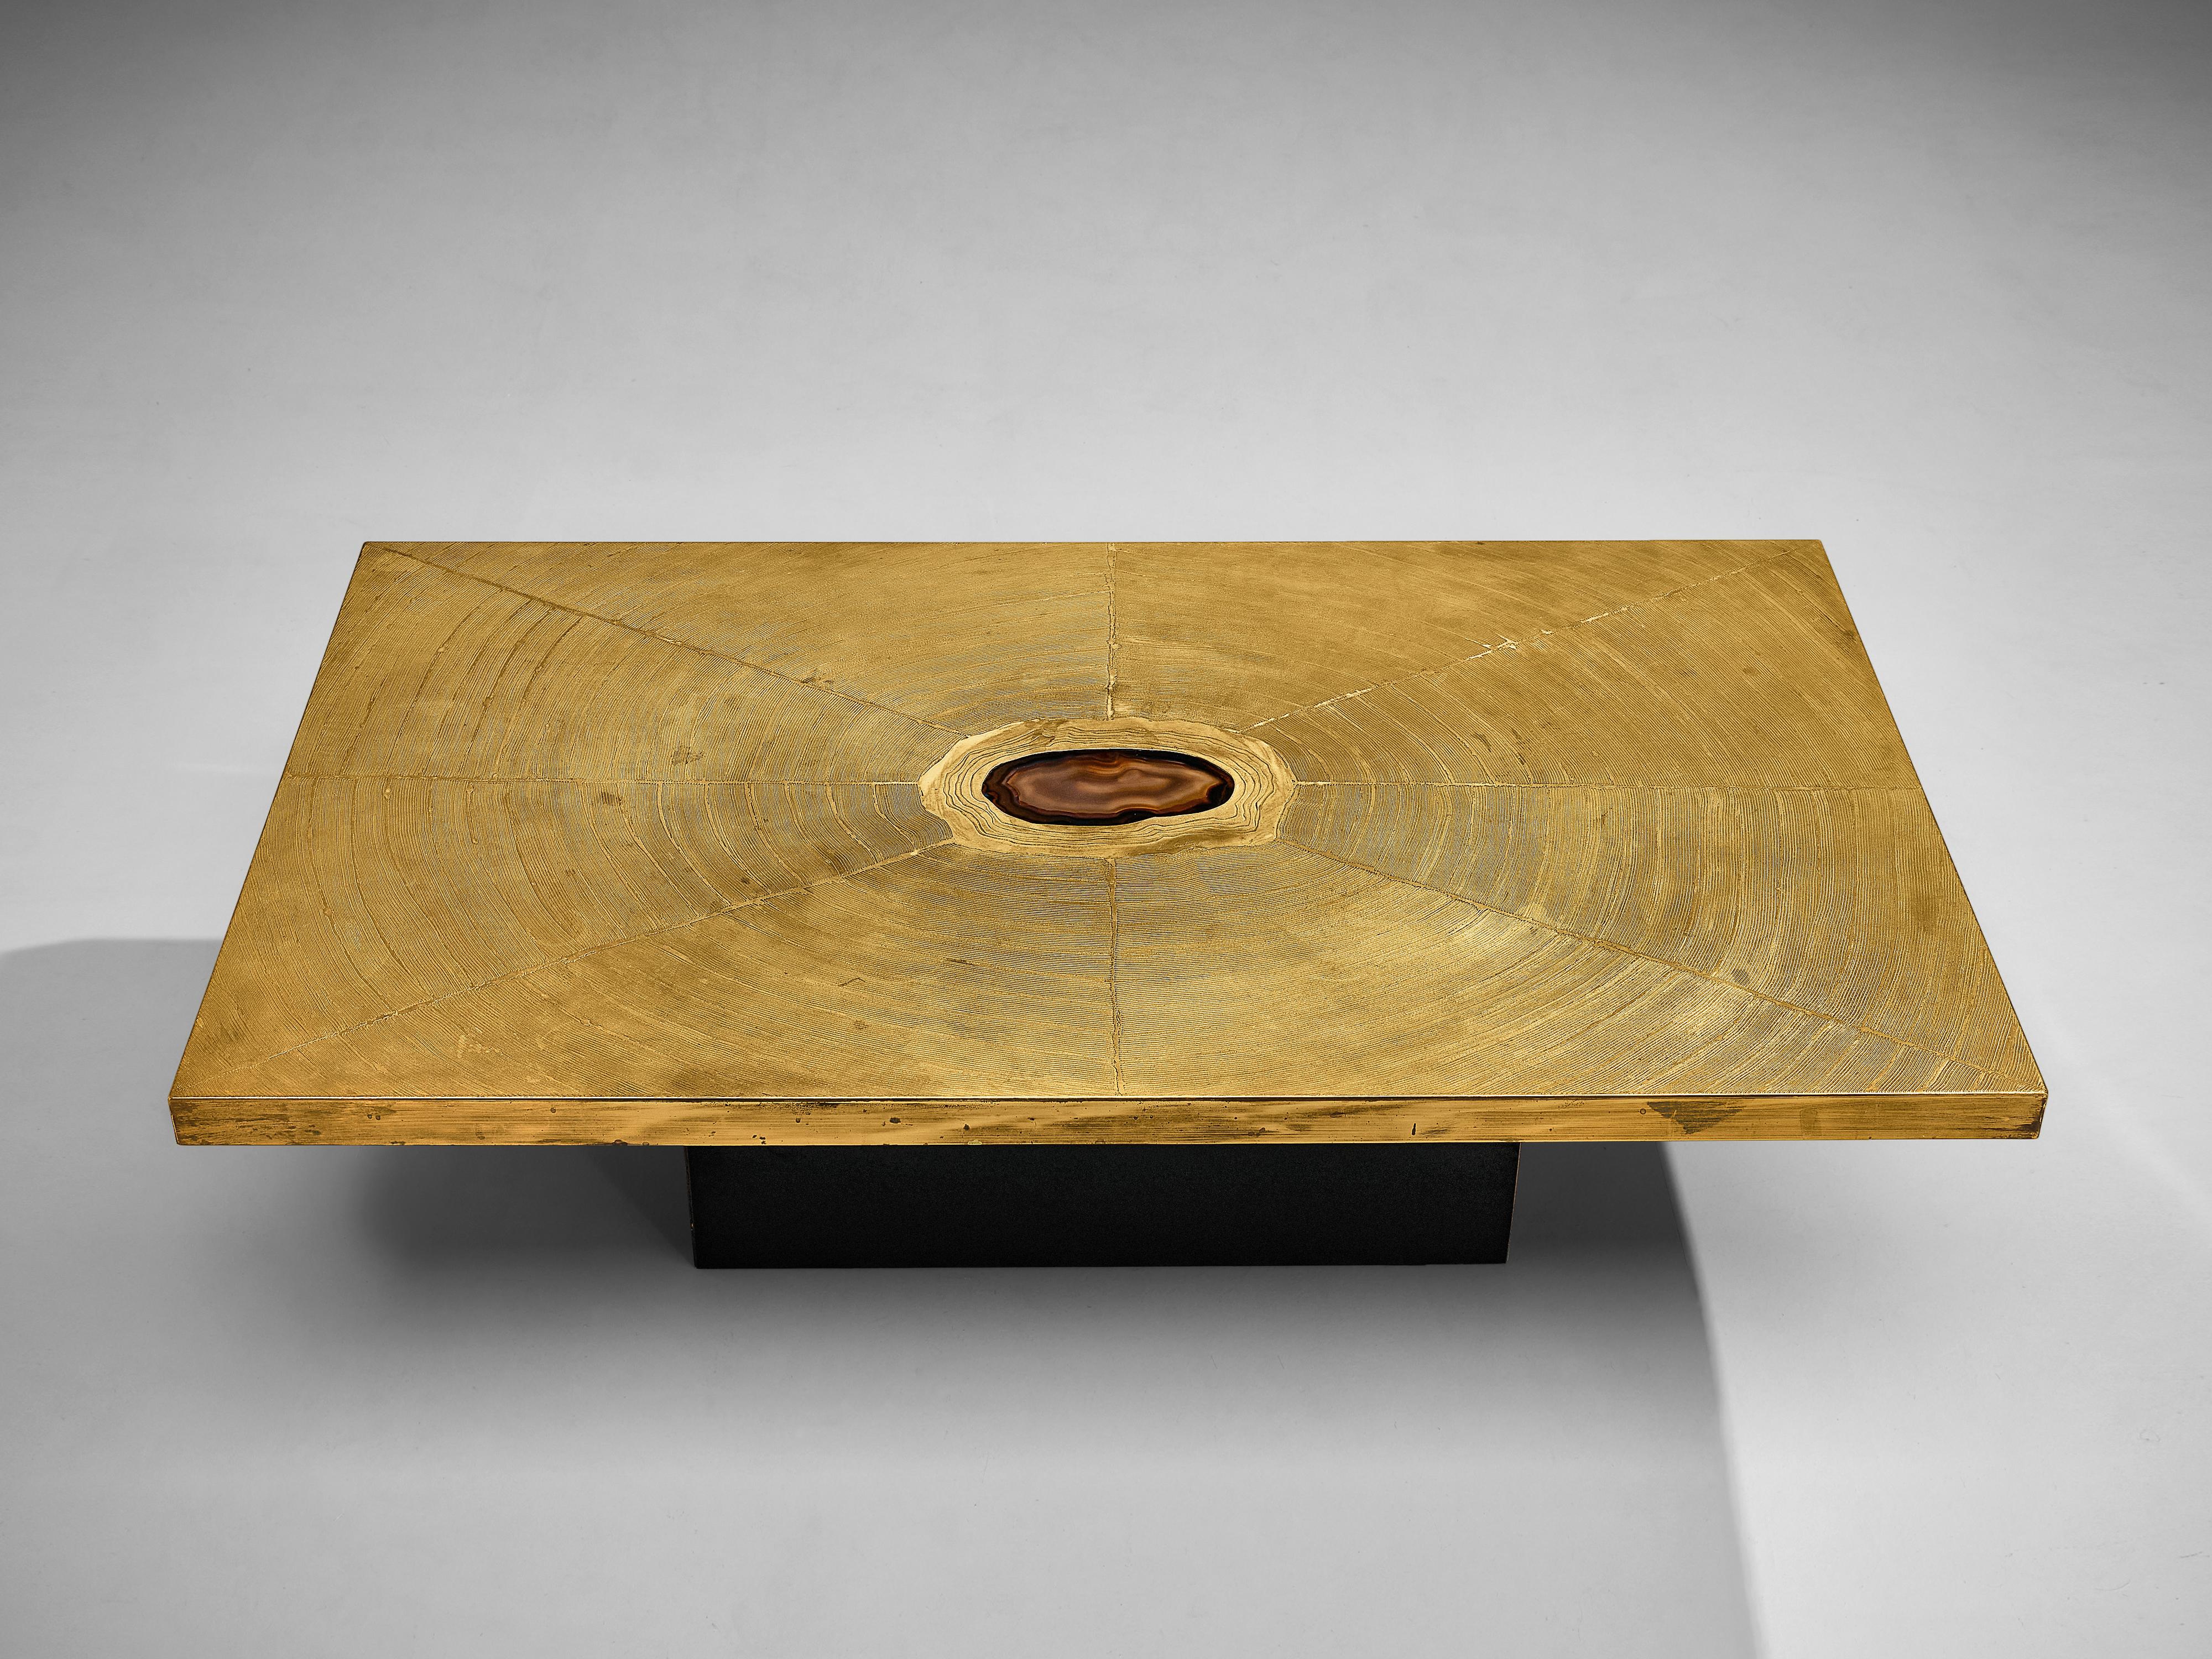 Lova Creation coffee table, brass, metal, agate, Belgium, 1980s

This luxurious side table by Lova Creation is a dazzling eyecatcher. The golden rectangular tabletop is signed and shows a pattern of large abstract brush strokes. The center is